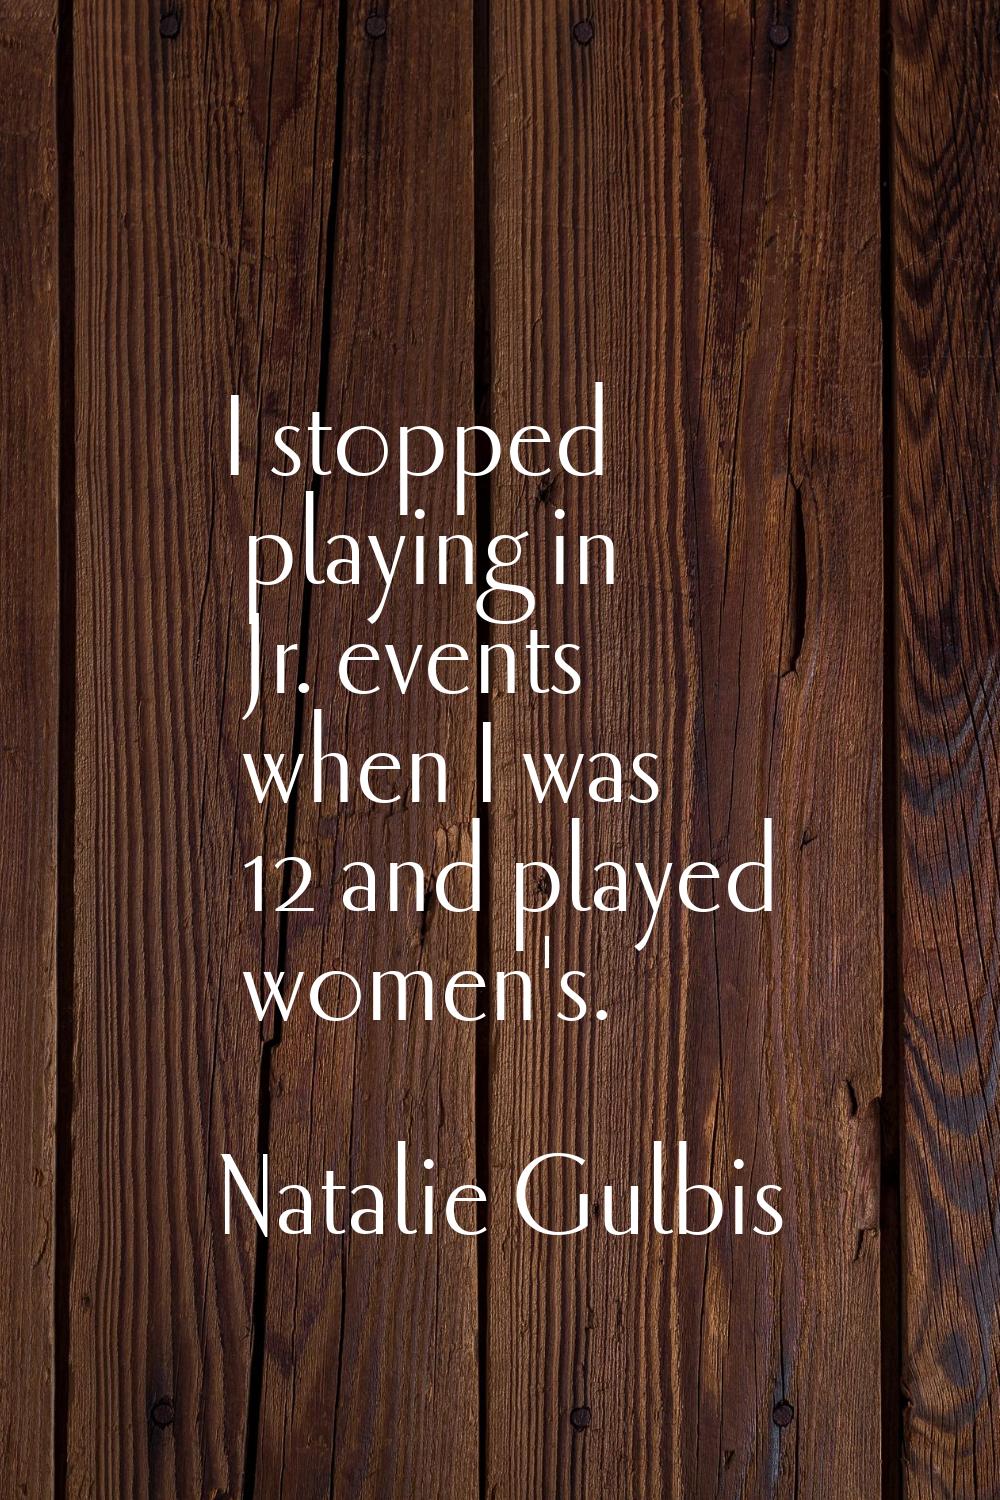 I stopped playing in Jr. events when I was 12 and played women's.